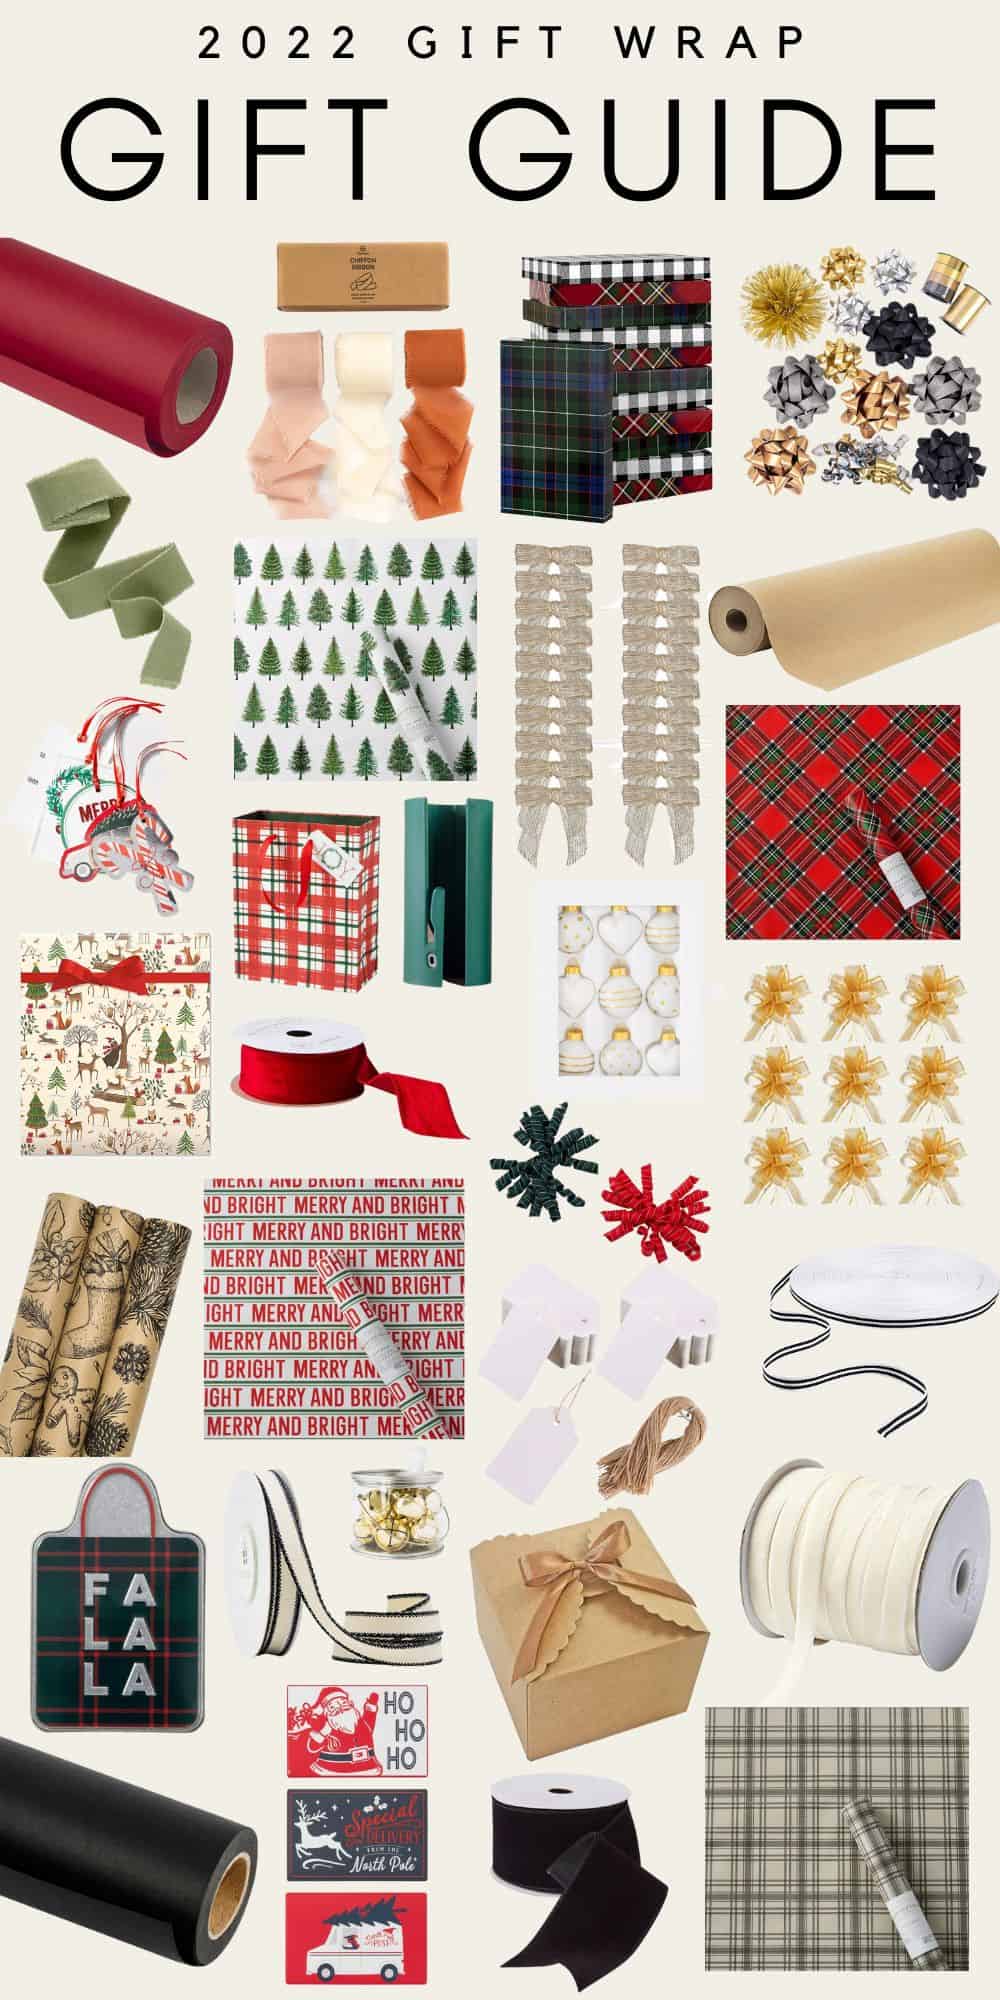 The 2022 Gift Guide: Wrapping Supplies